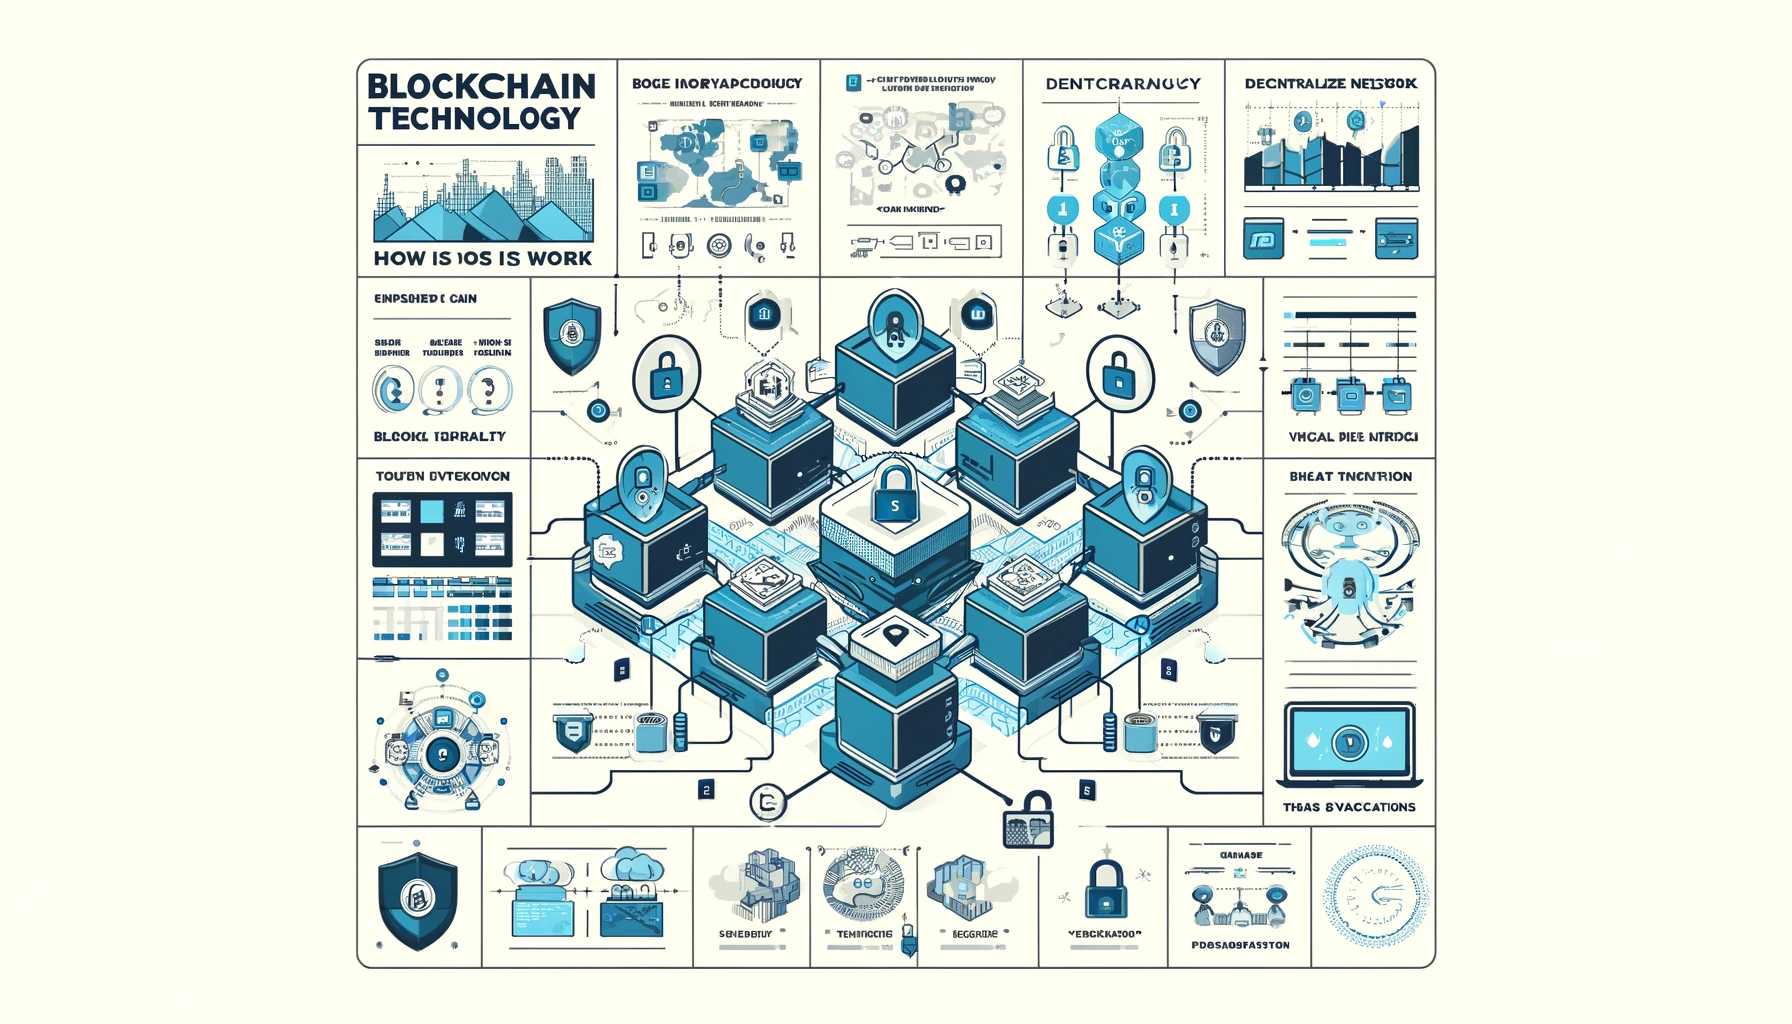 Blockchain Technology: How Does it work